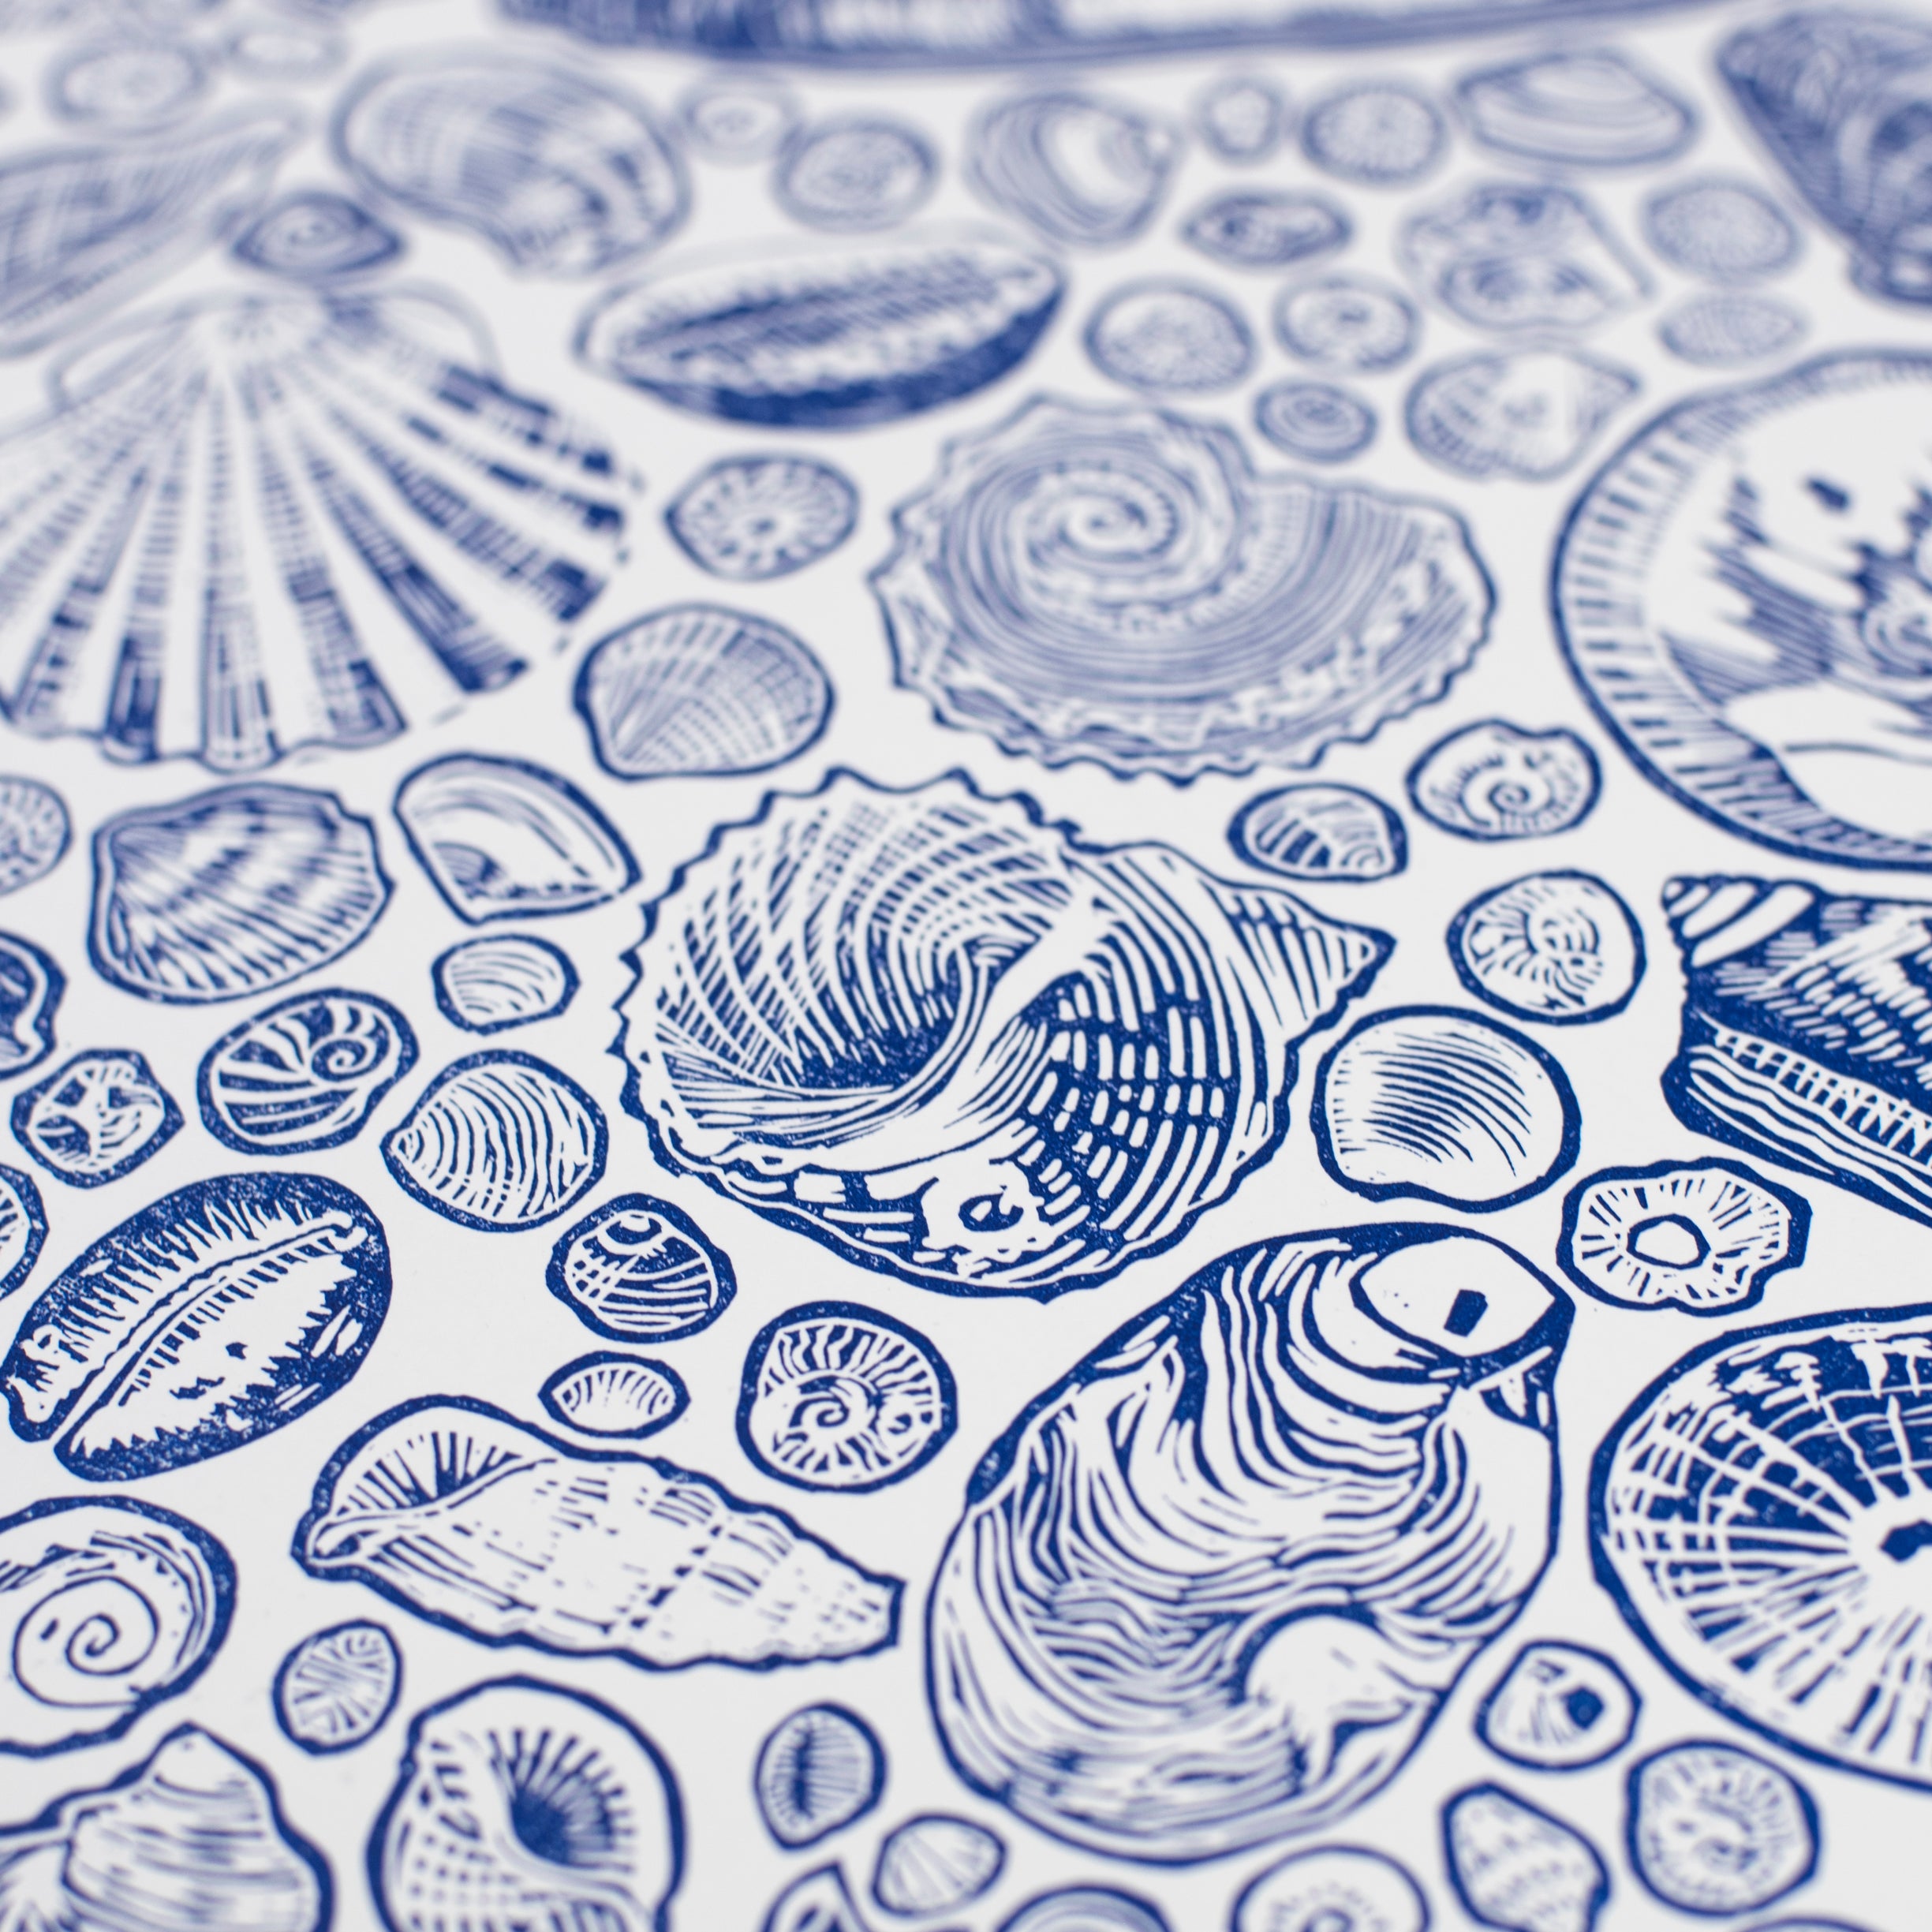 Linocut Print - Shell Collection (Limited Edition)